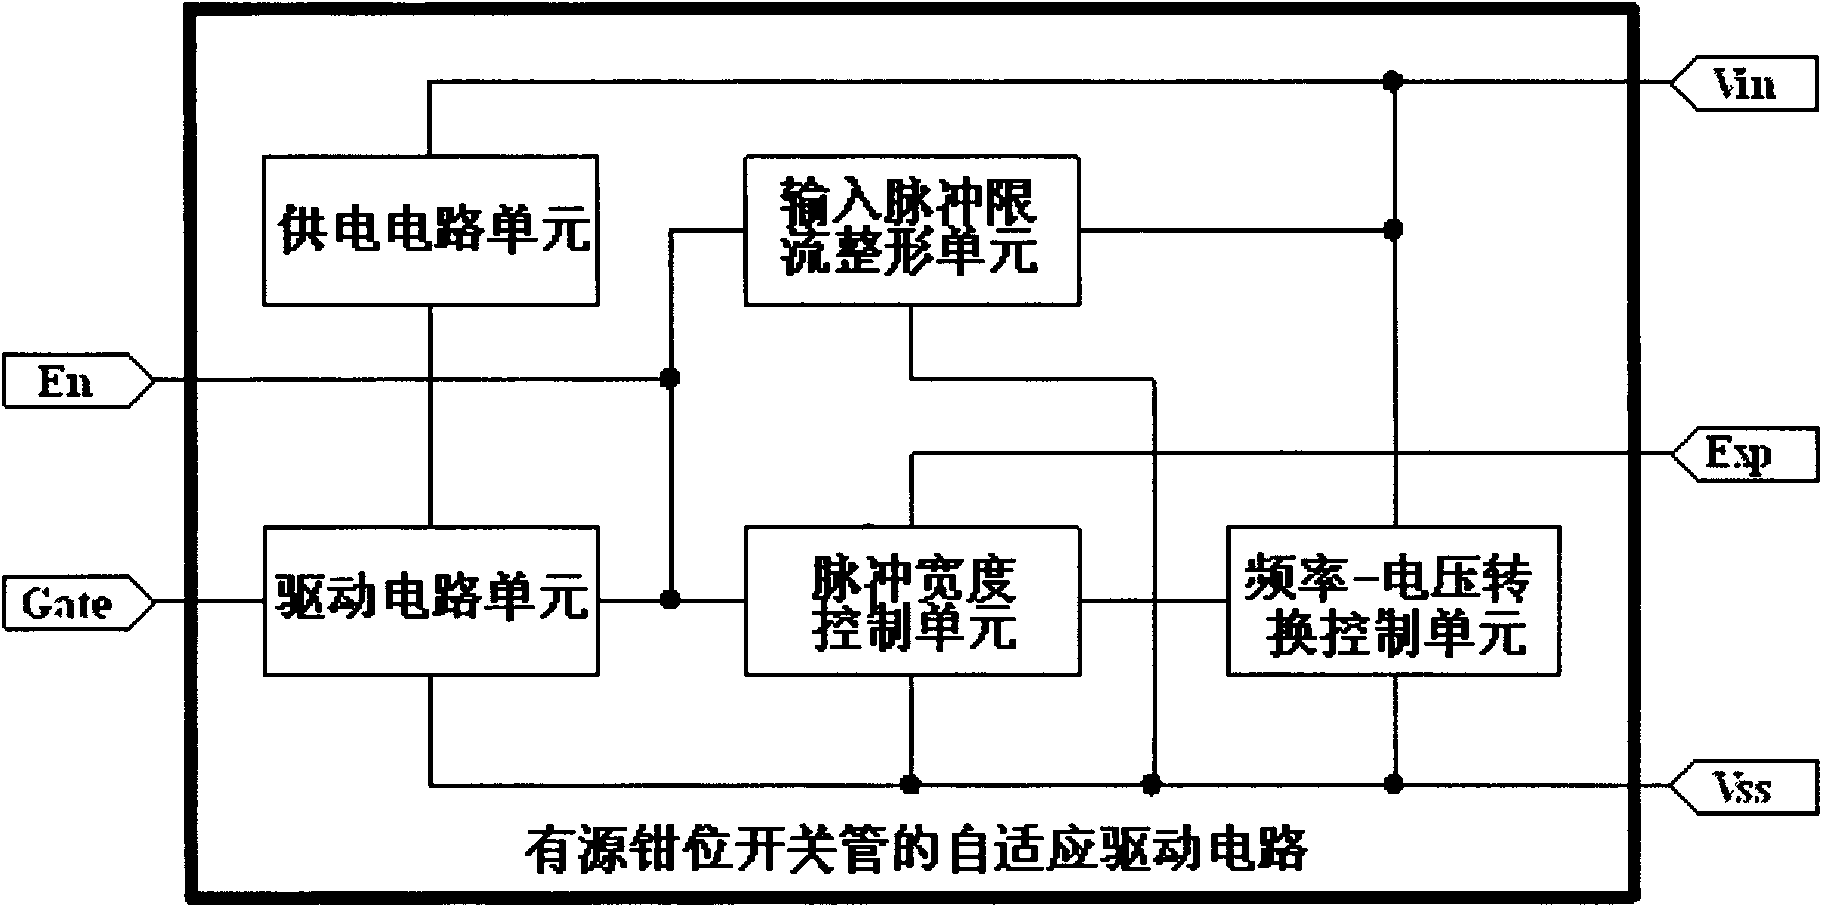 Self-adaptive driving circuit of active clamping switch tube